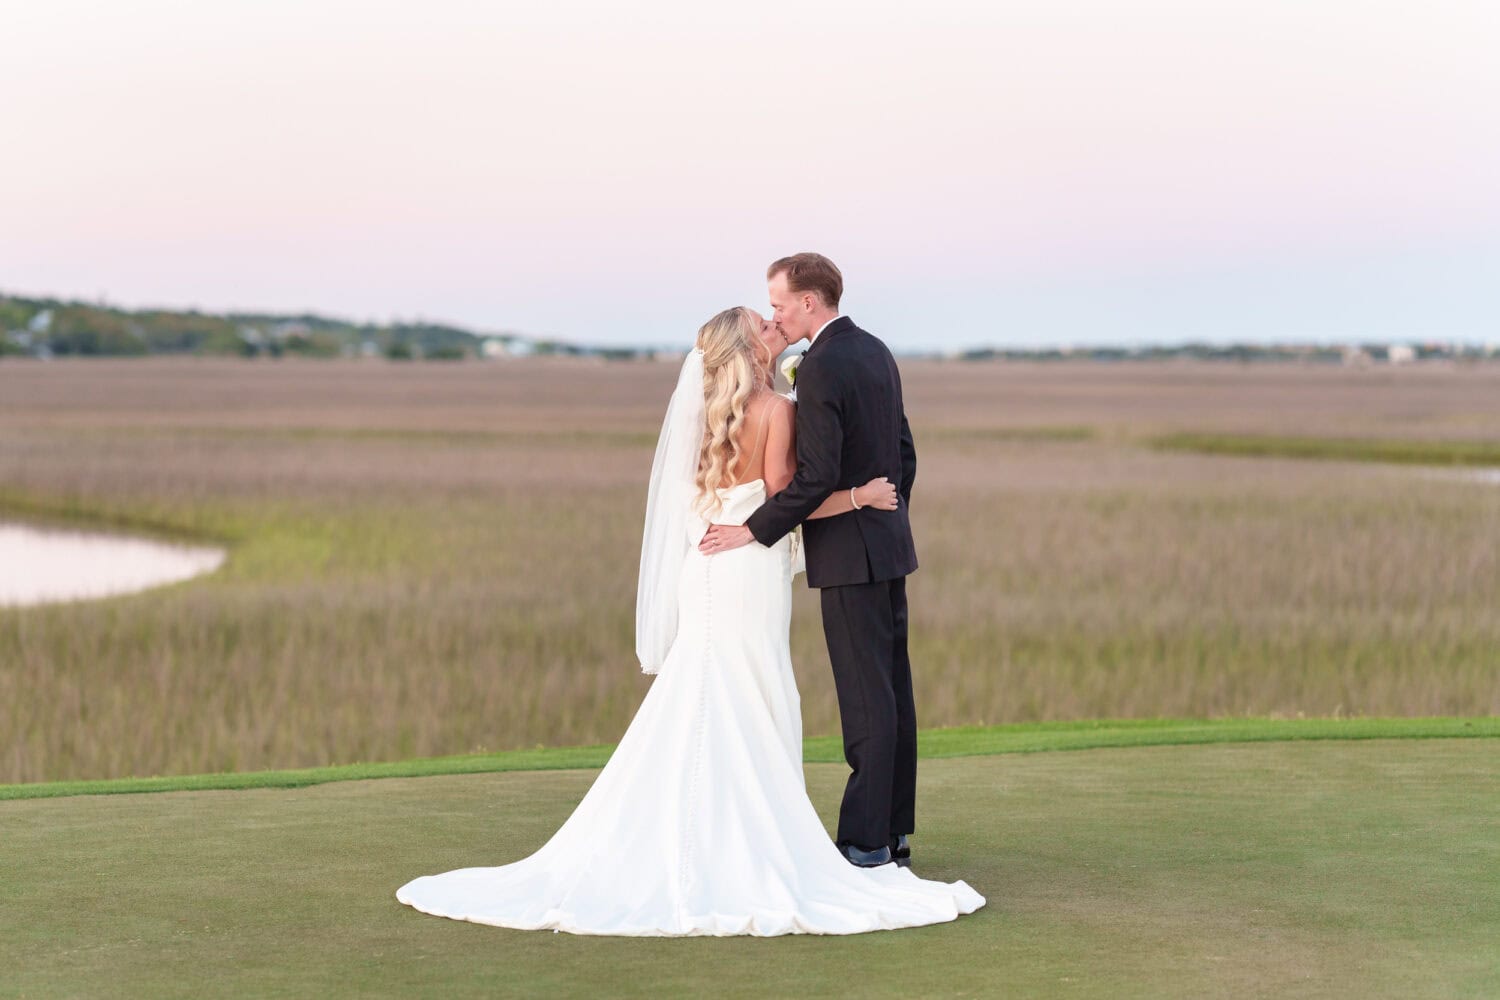 Kiss with brides dress flowing behind her - Pawleys Plantation